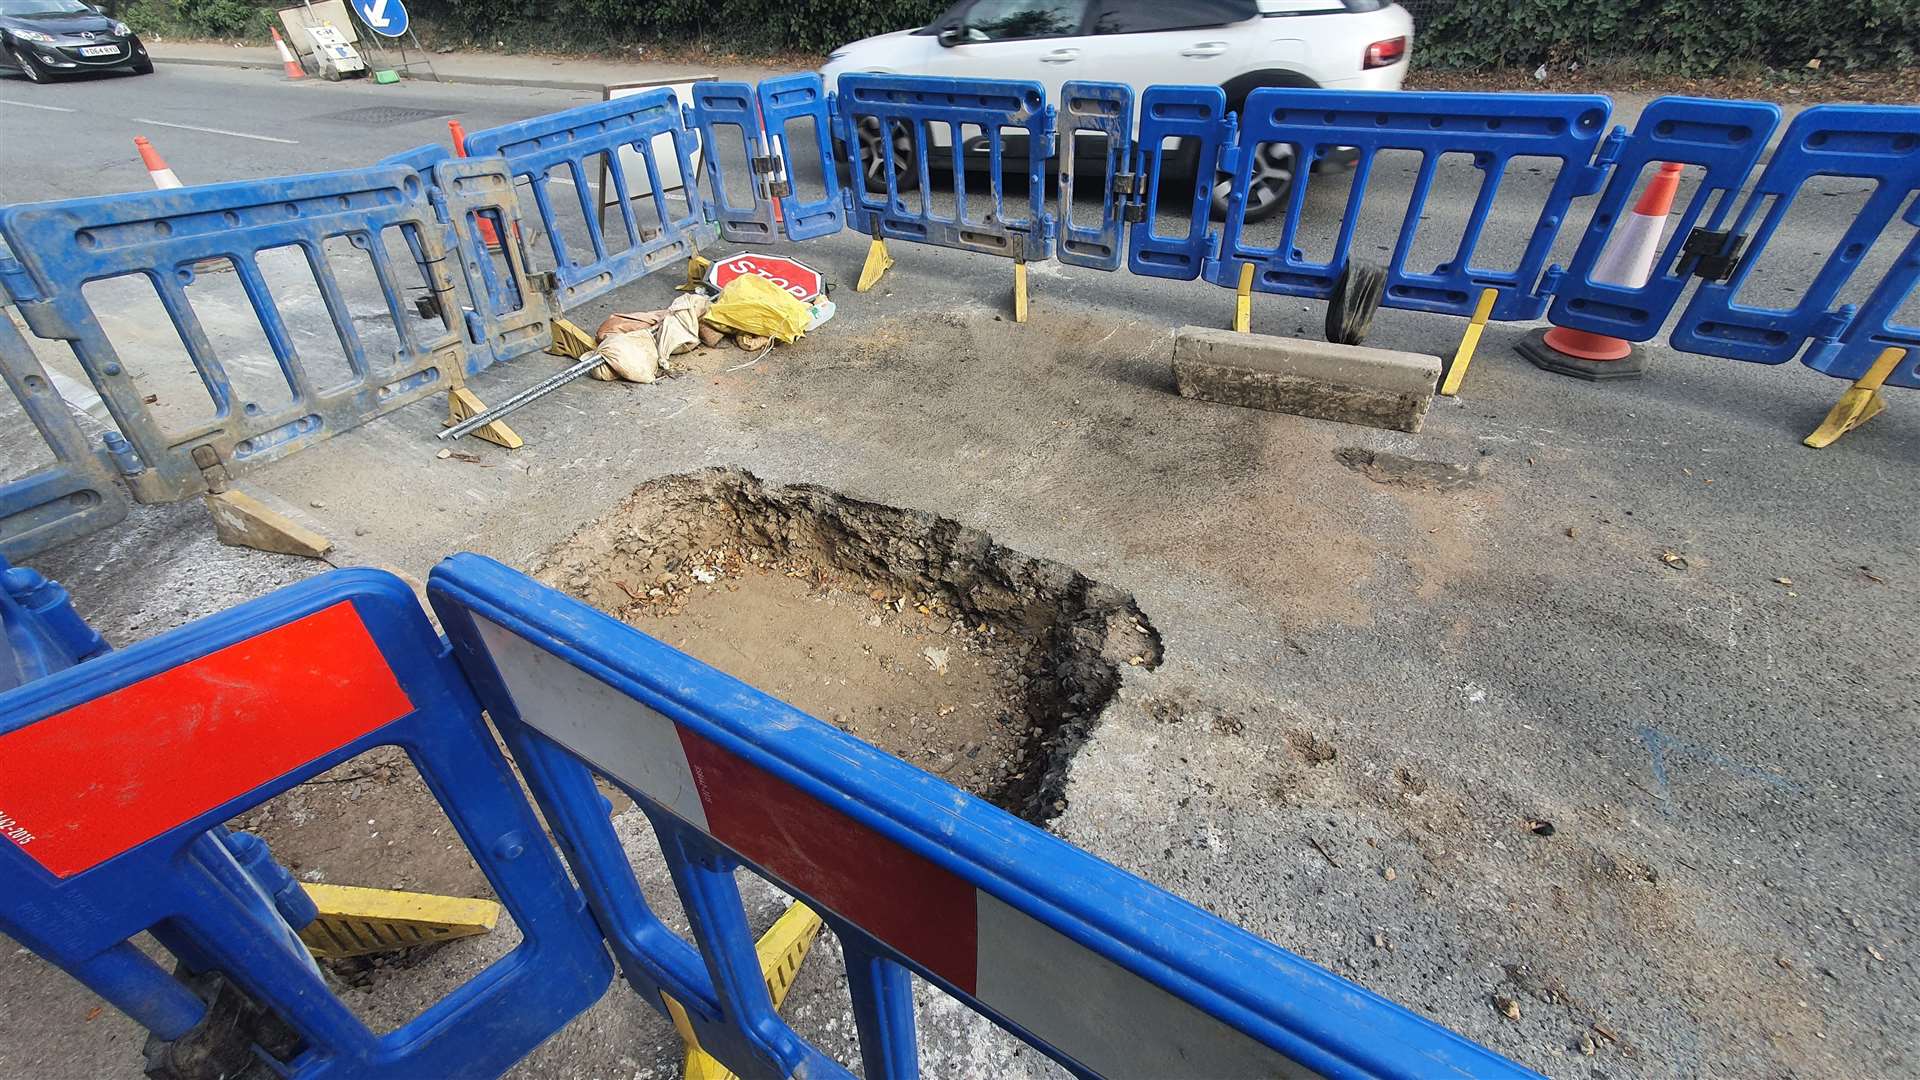 London Road has been dug up more than 70 times